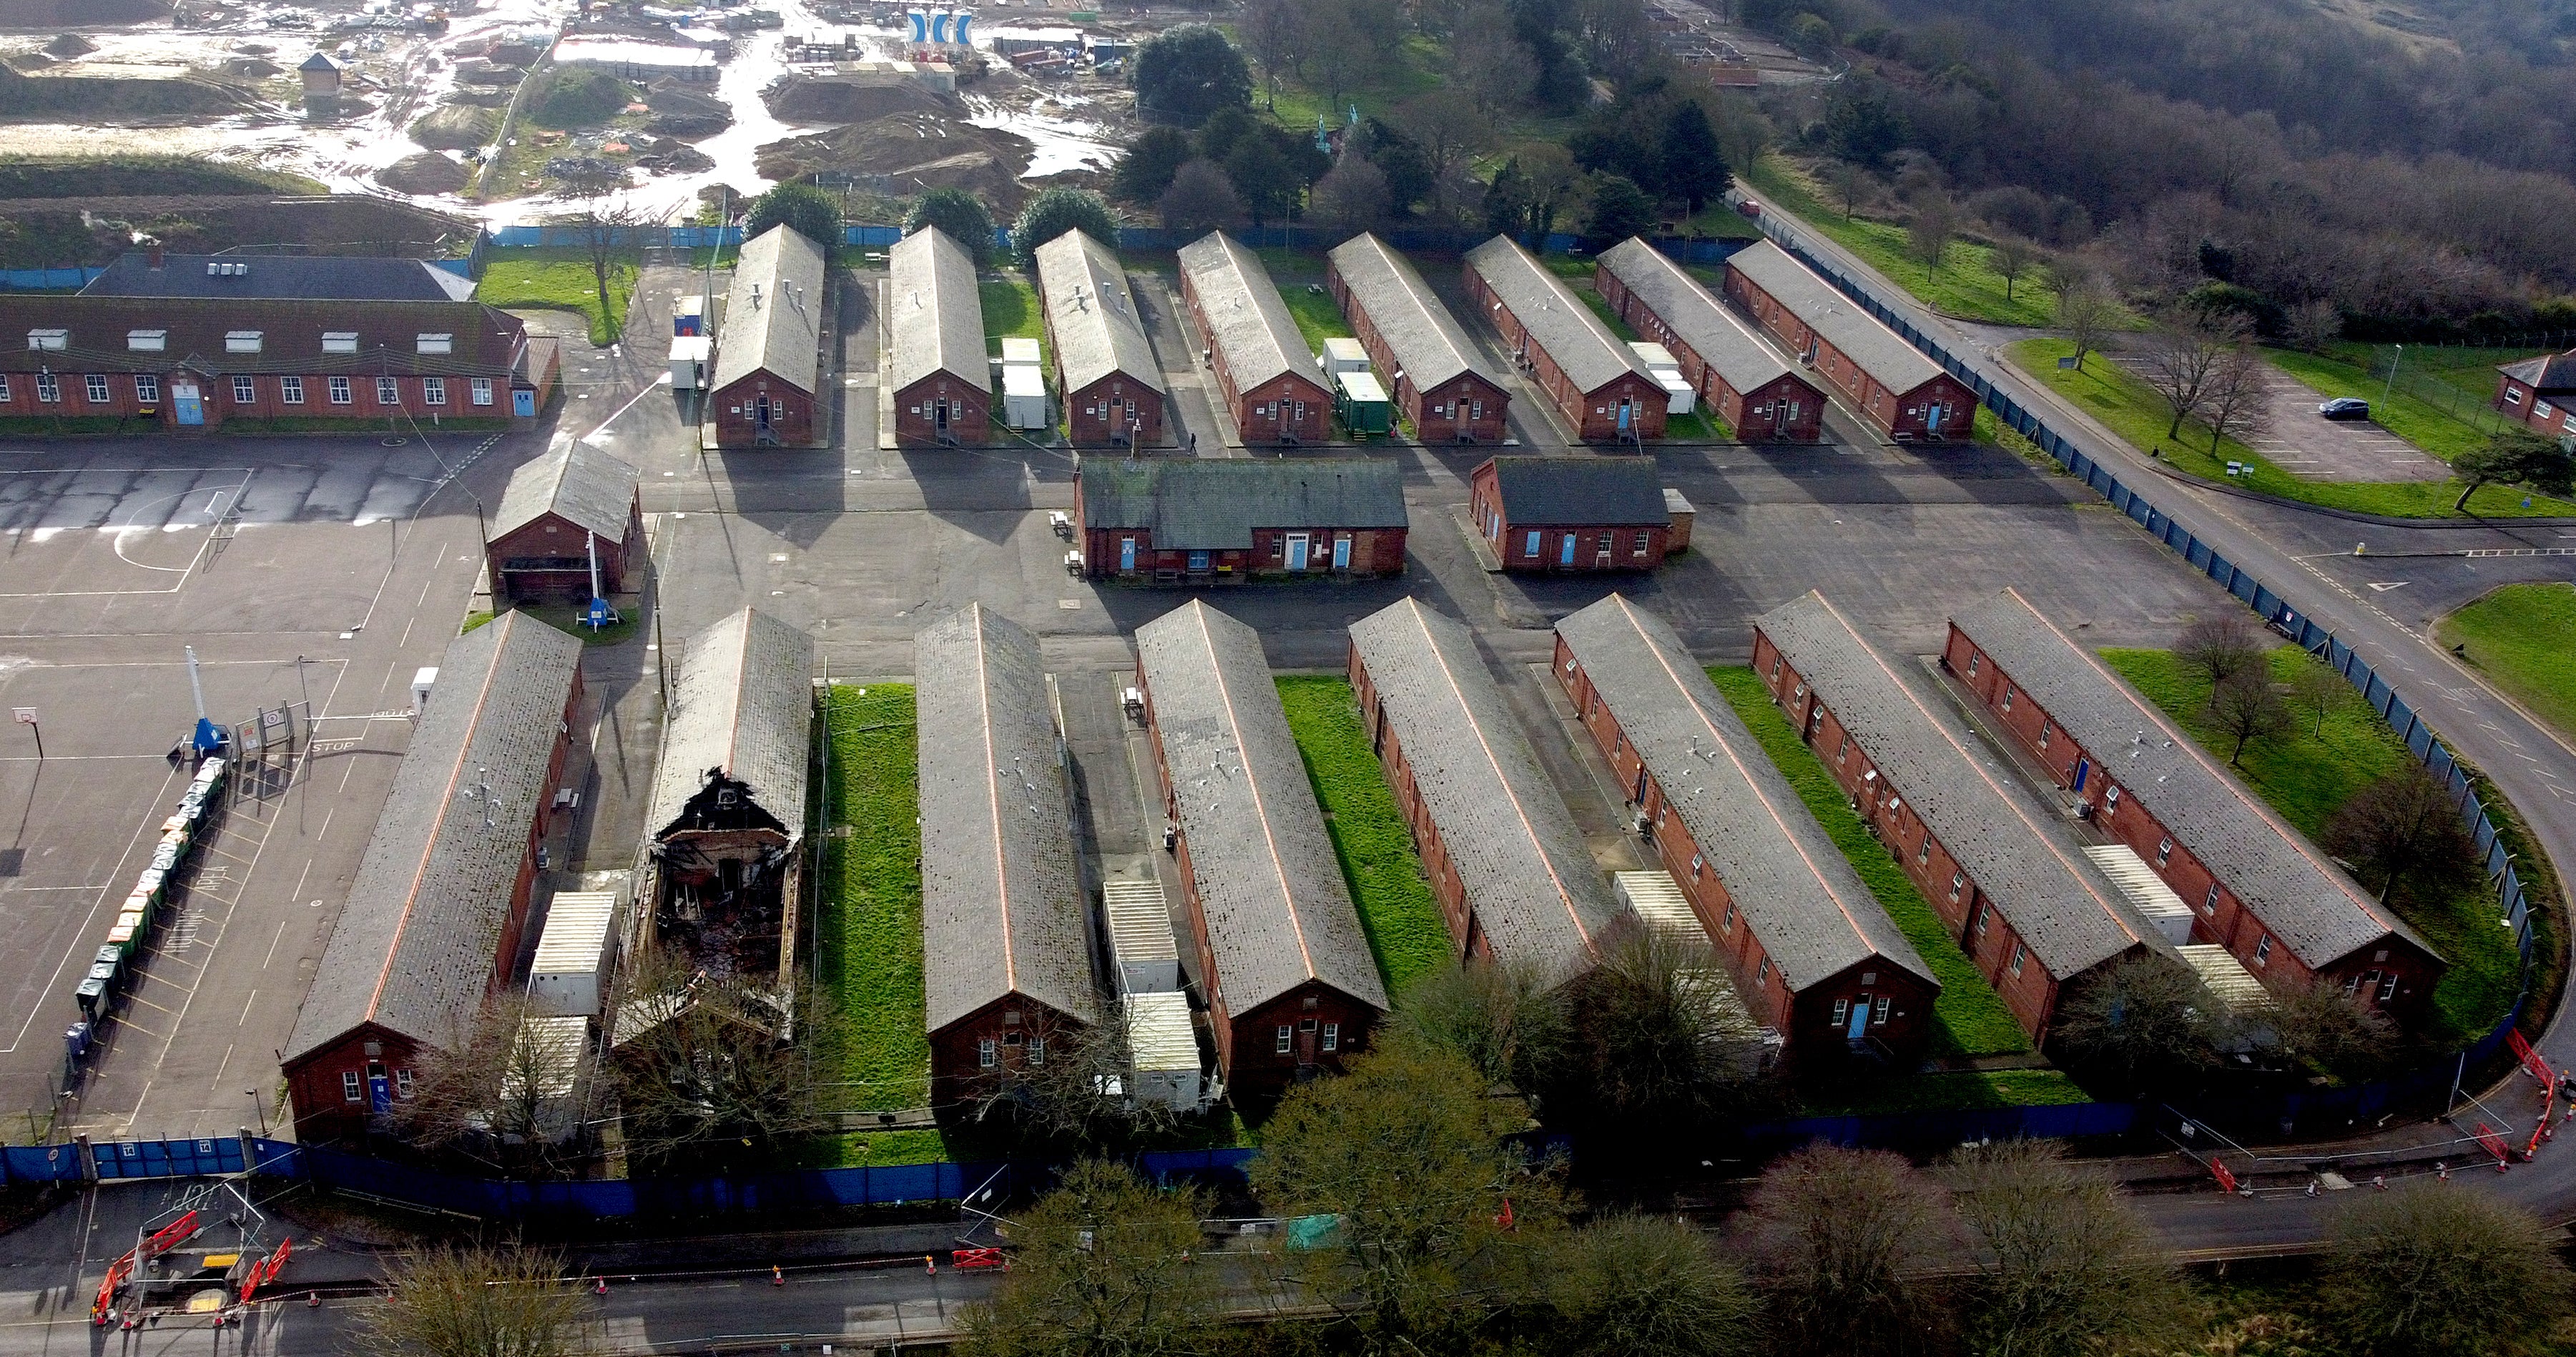 A report by the all-party parliamentary group (APPG) on immigration detention has called for the closure of Napier Barracks